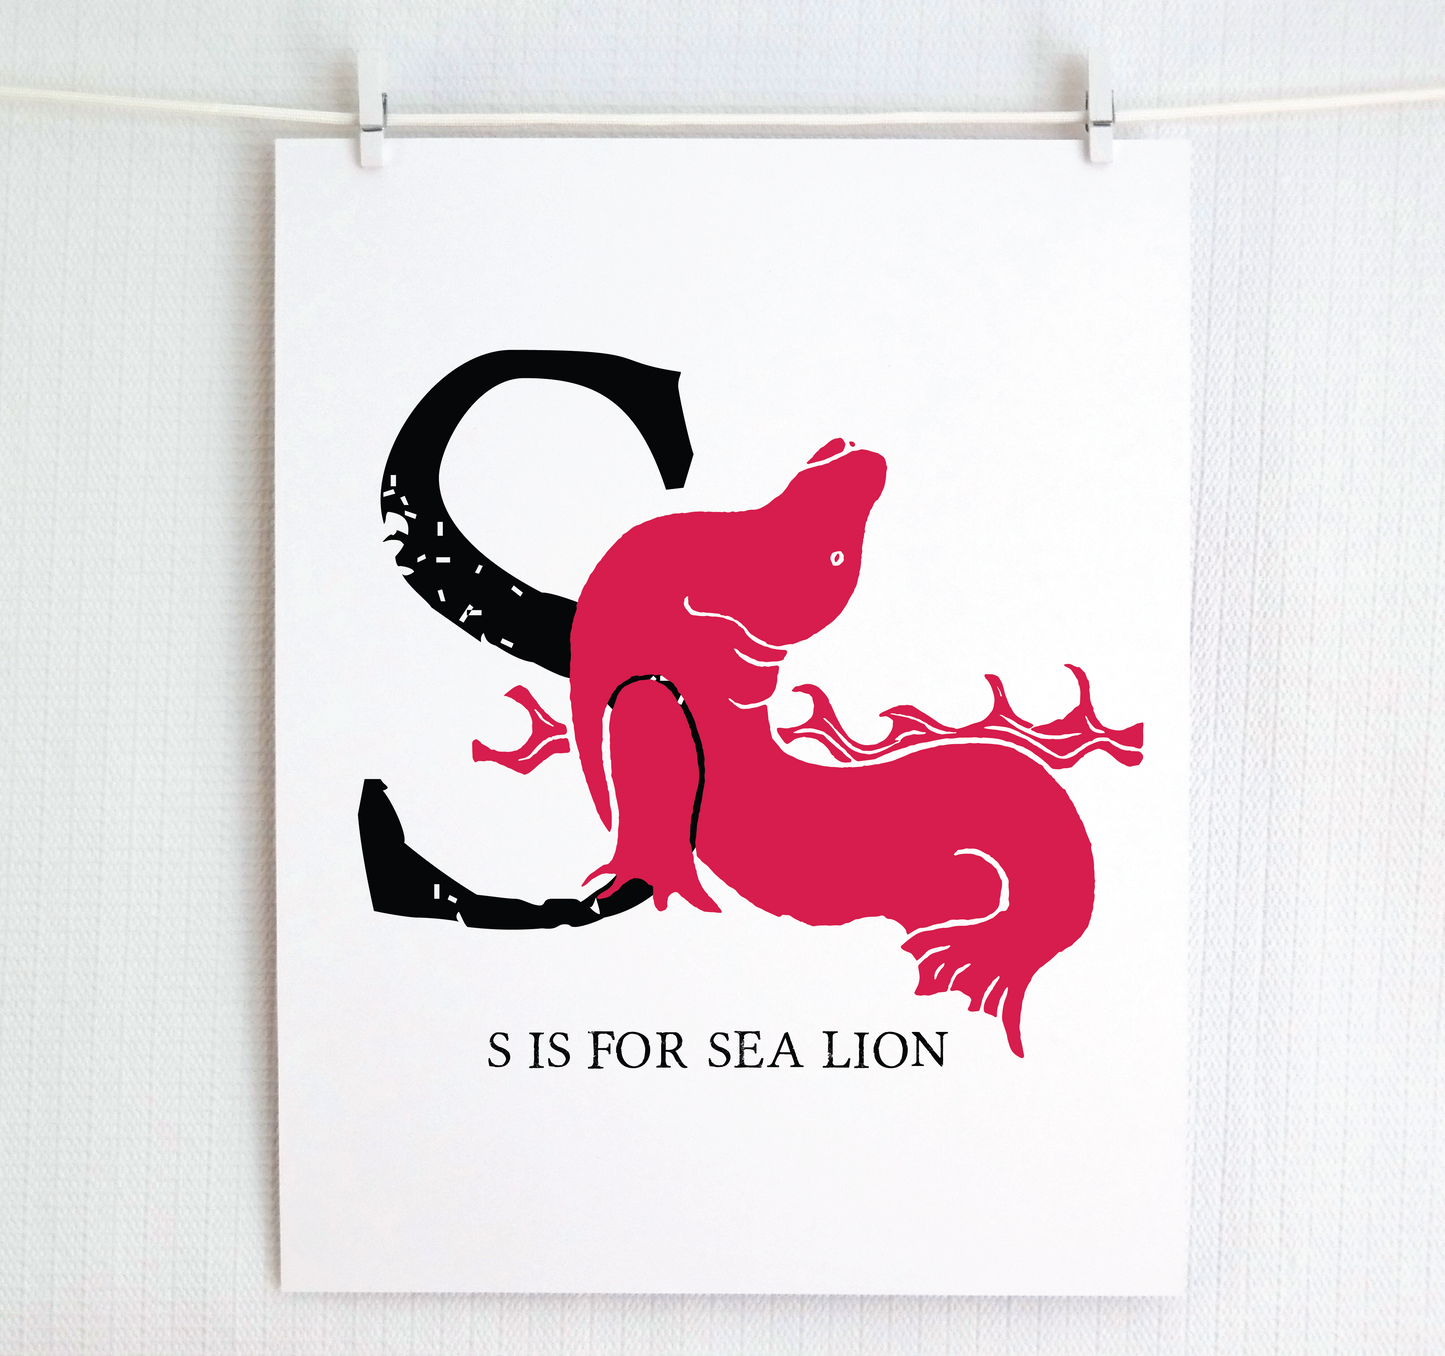 S is for Sea Lion